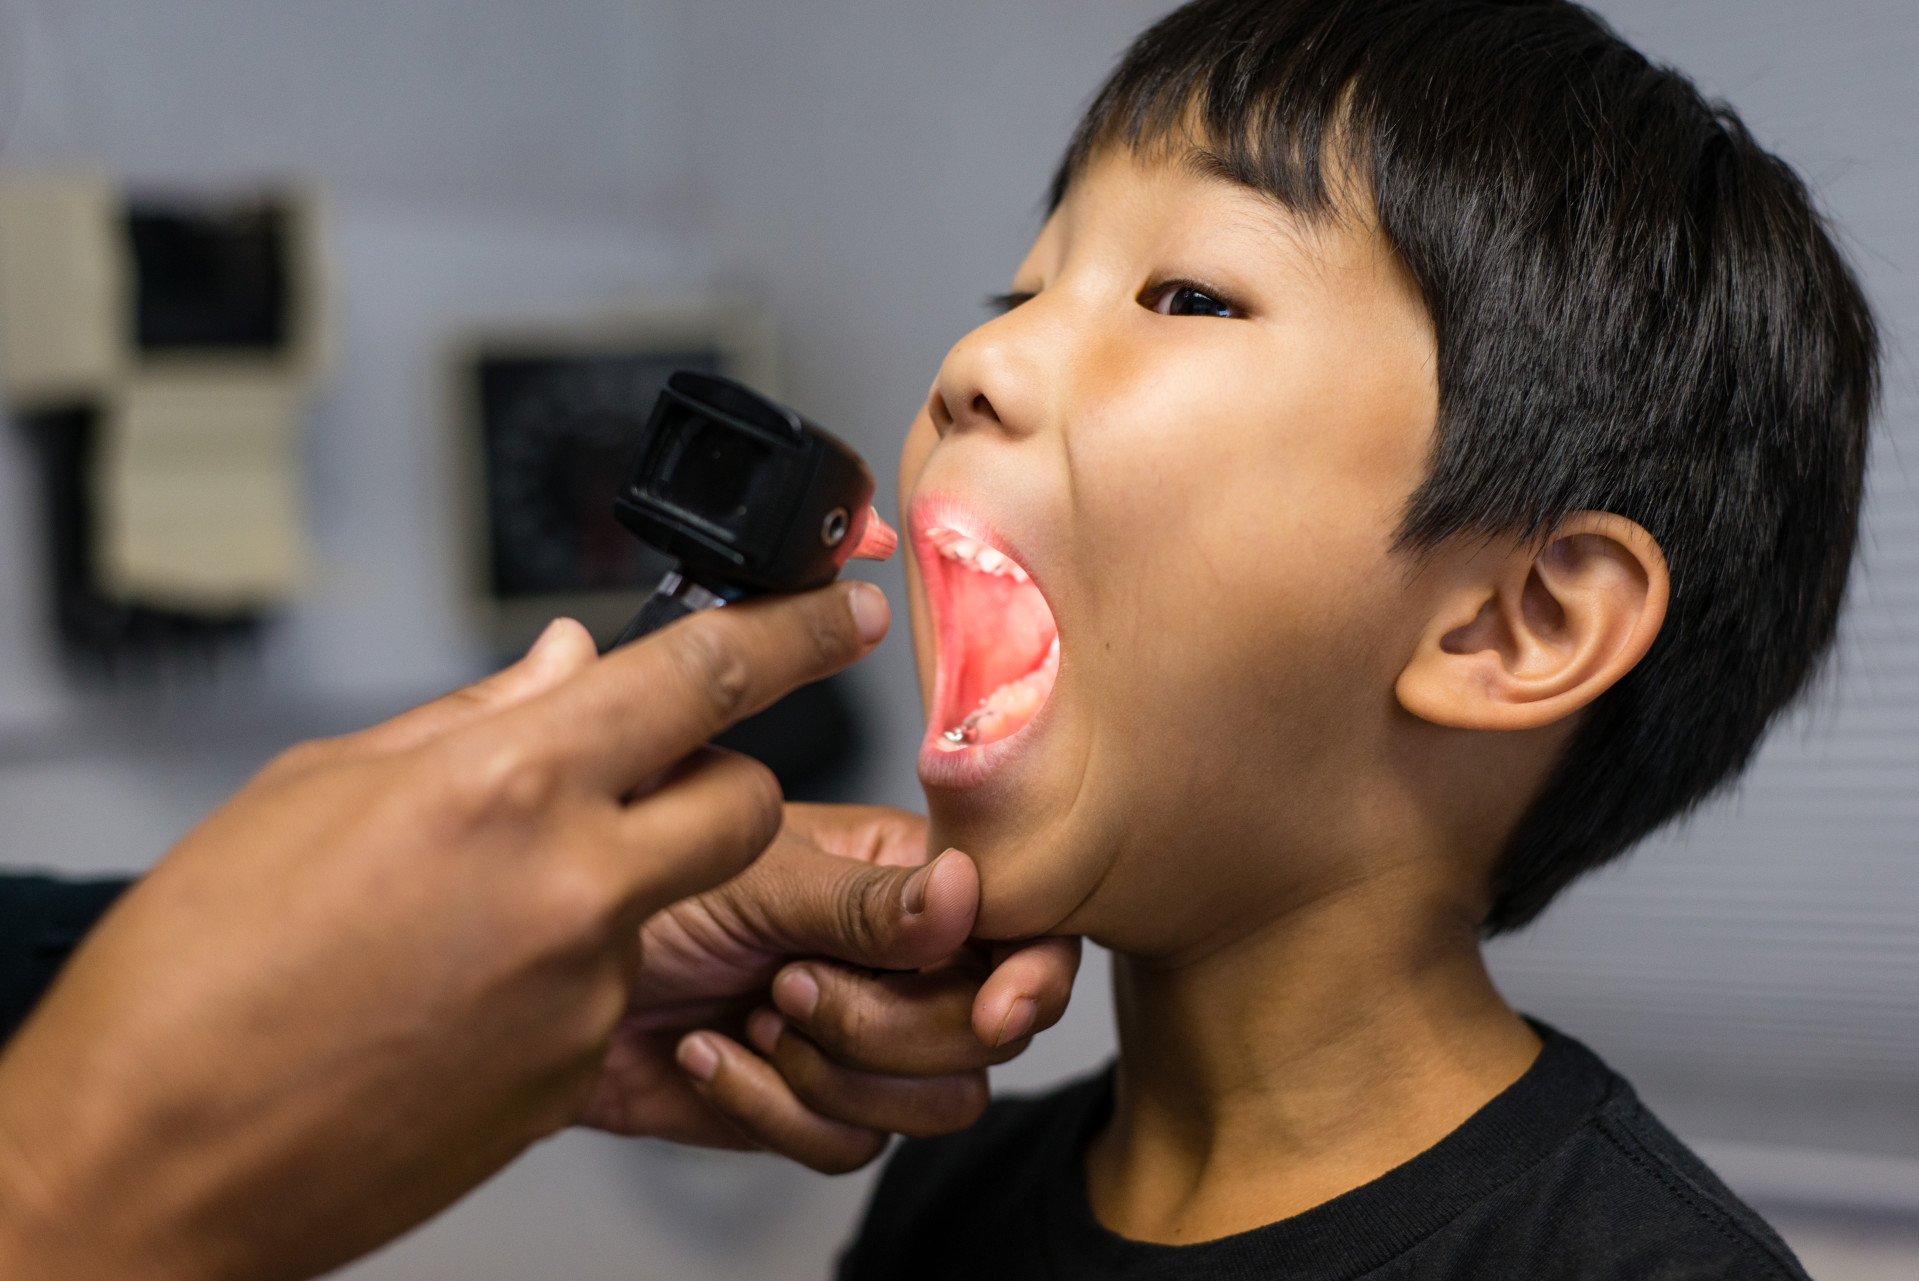 Daniel Lee, 5, gets his airway checked during his appointment at the Childrens Hospital of Orange County Breathmobile. Lee’s asthma symptoms prohibit him from playing soccer (Heidi de Marco/KHN)